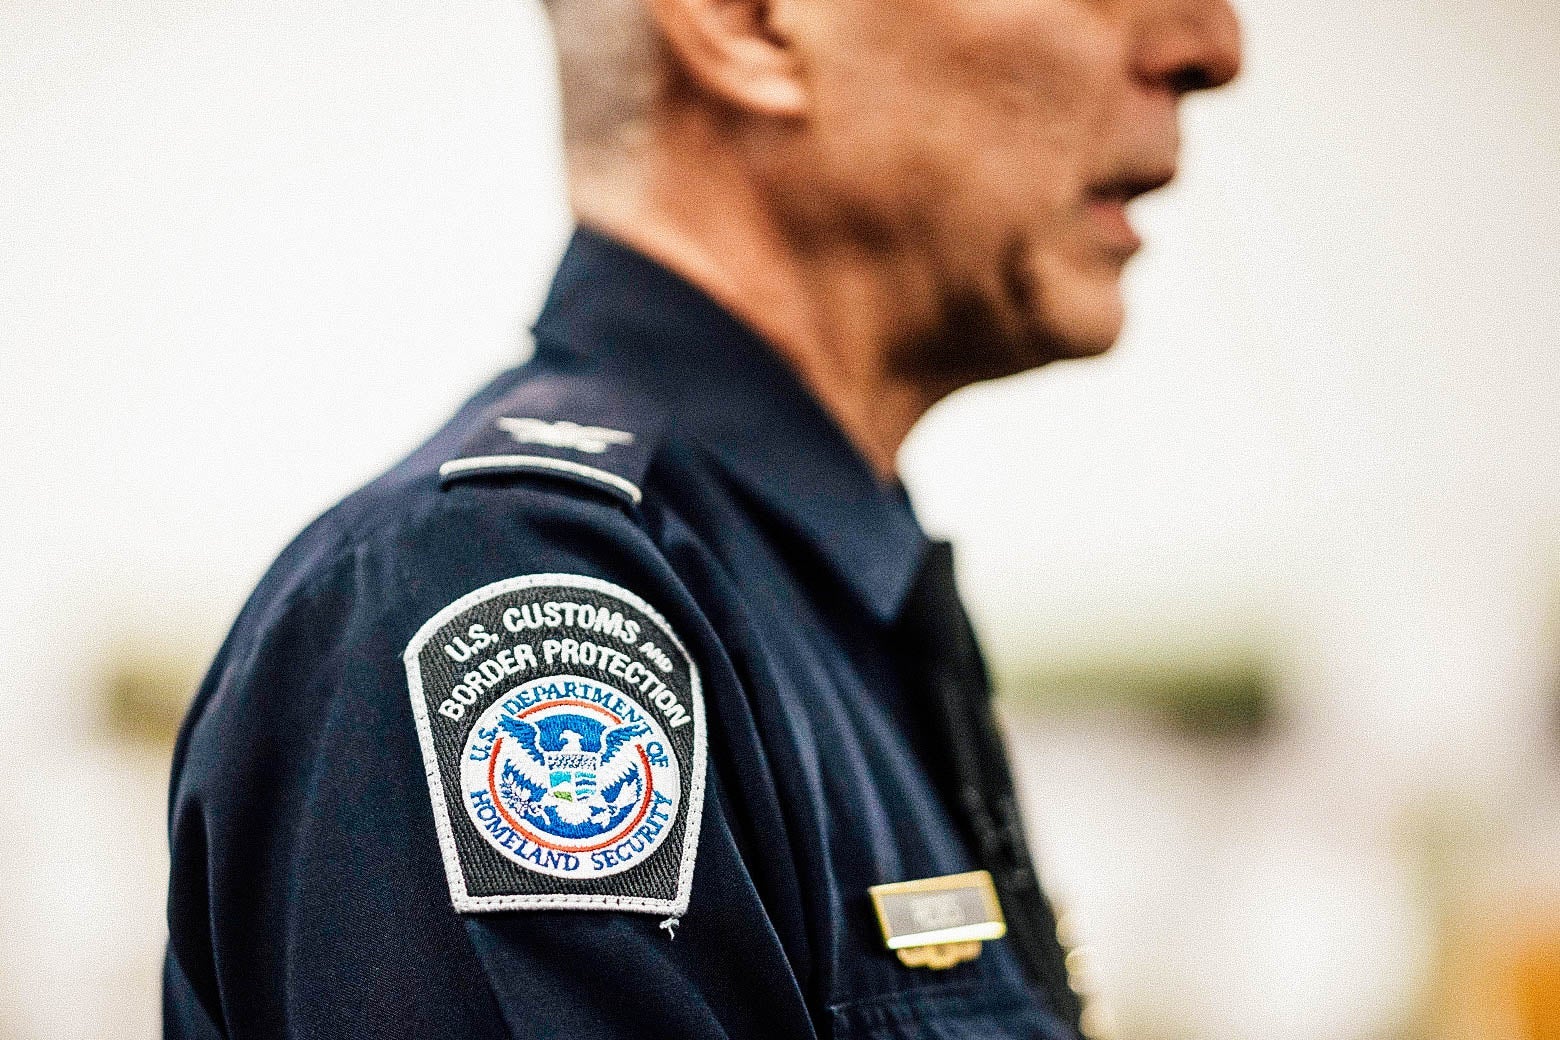 A man in a U.S. Customs and Border Protection uniform is seen from the side, with a focus on the agency's logo embroidered on his shoulder.